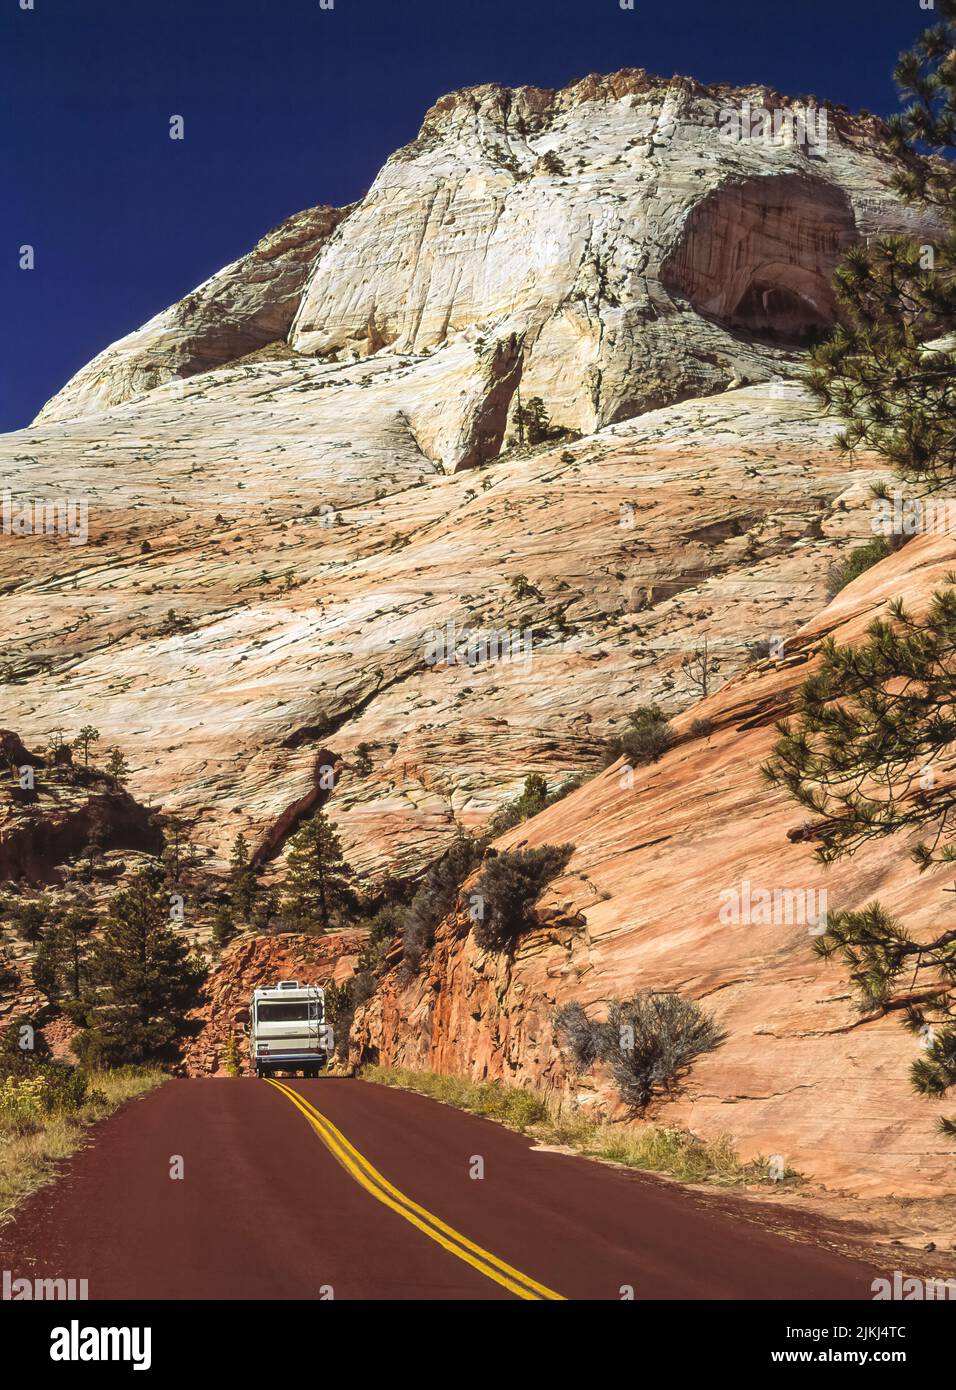 Highway, Zion National Park, Utah, USA, the Park is located in the Southwestern United States, near Springdale Stock Photo